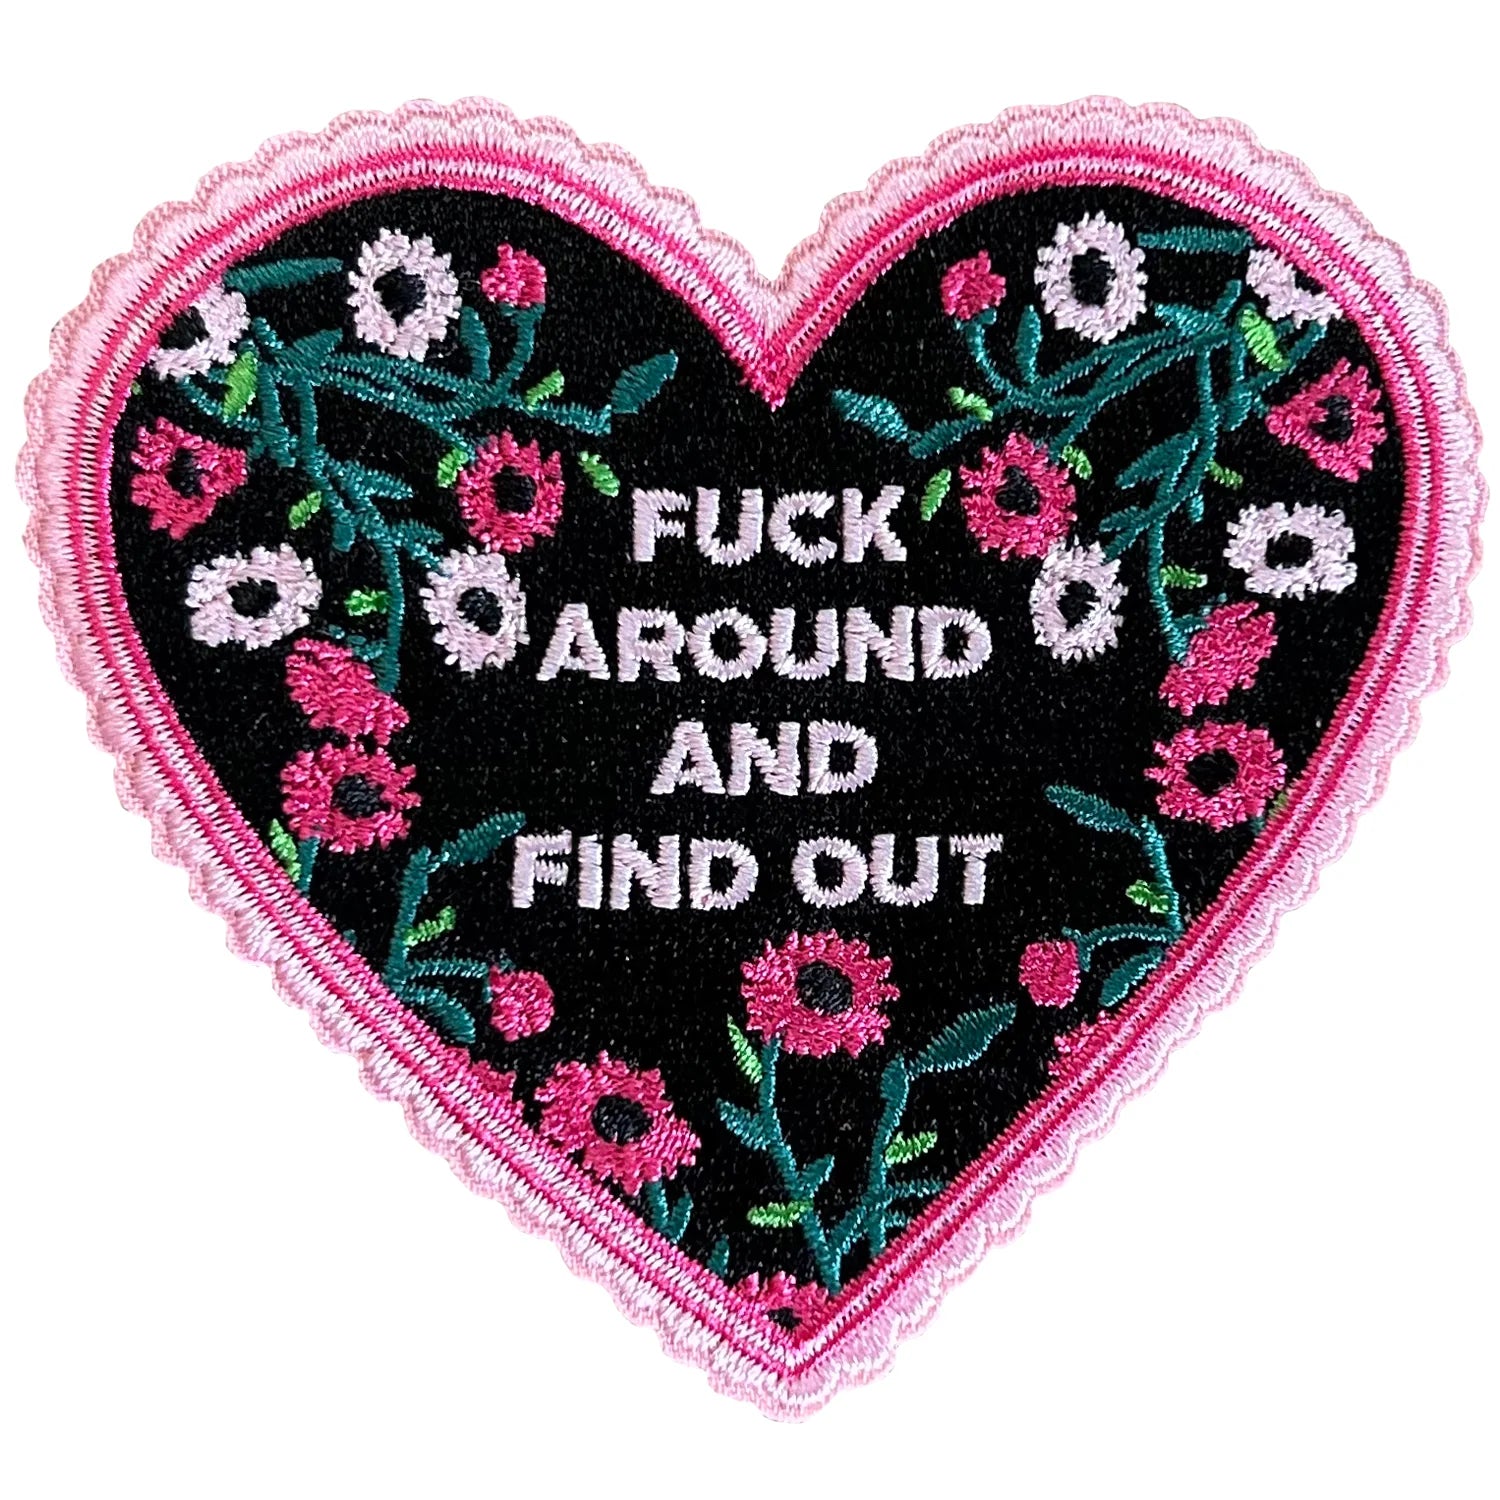 Groovy Things Patches